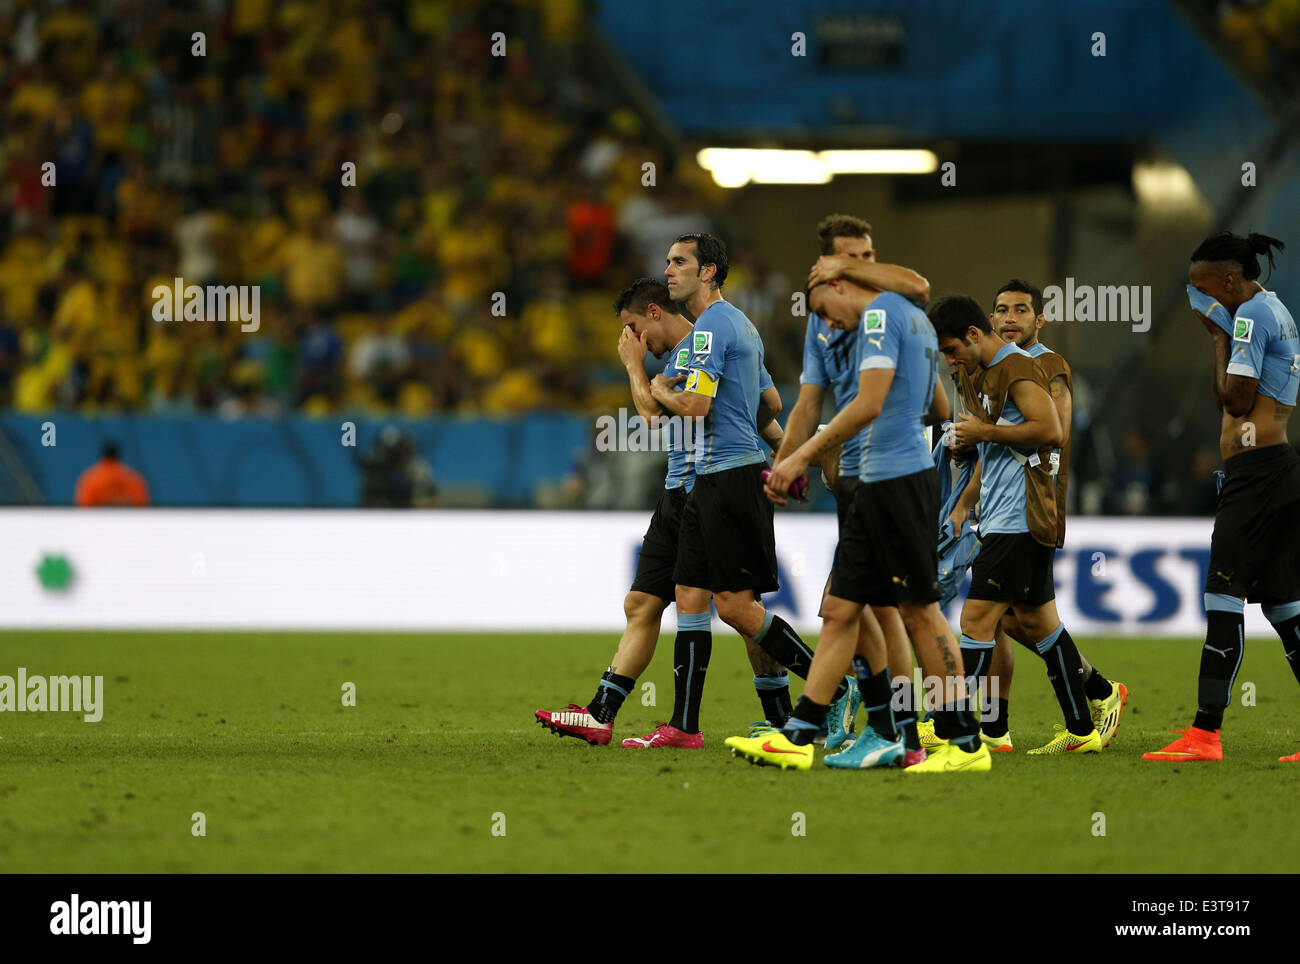 Rio De Janeiro, Brazil. 28th June, 2014. Uruguay's players leave the field after a Round of 16 match between Colombia and Uruguay of 2014 FIFA World Cup at the Estadio do Maracana Stadium in Rio de Janeiro, Brazil, on June 28, 2014. Colombia won 2-0 over Uruguay and qualified for Quarter-finals on Saturday. Credit:  Wang Lili/Xinhua/Alamy Live News Stock Photo